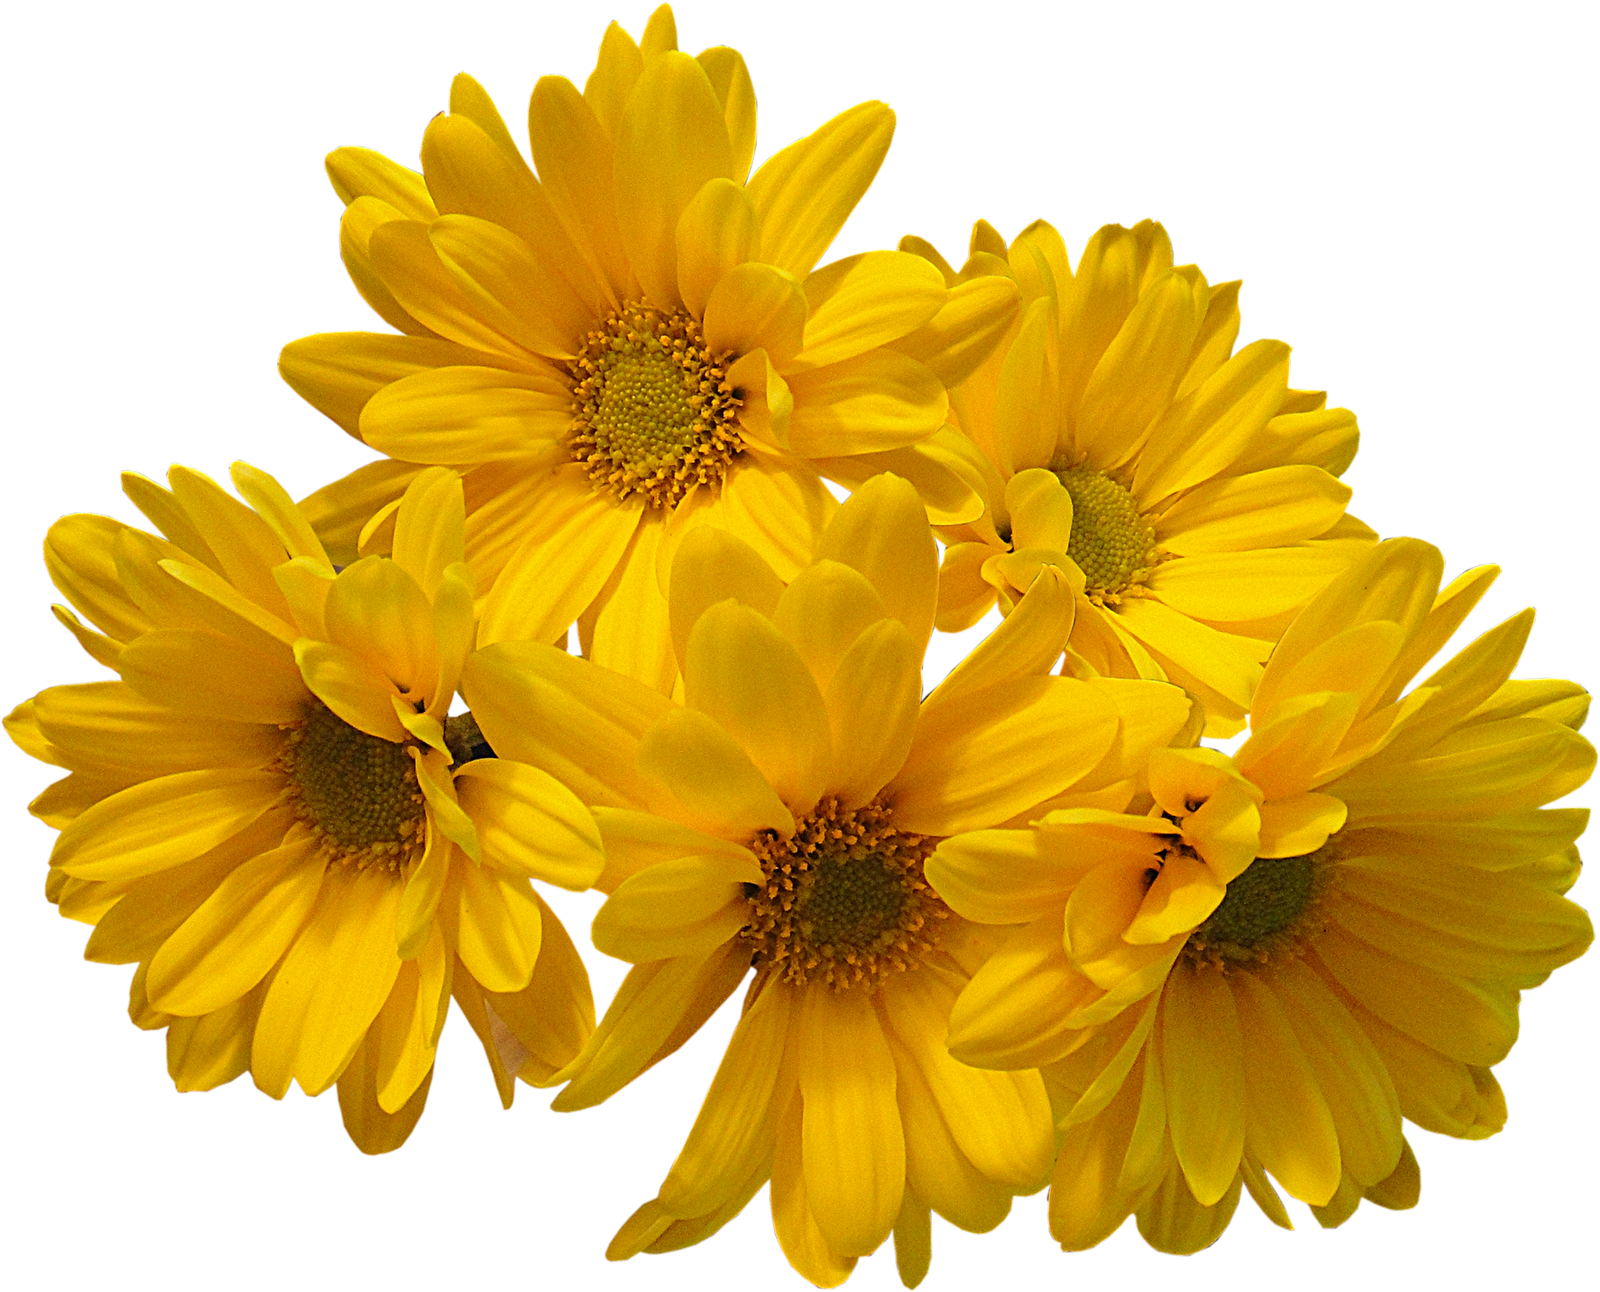 Yellow Flowers Bouquet PNG Transparent Image